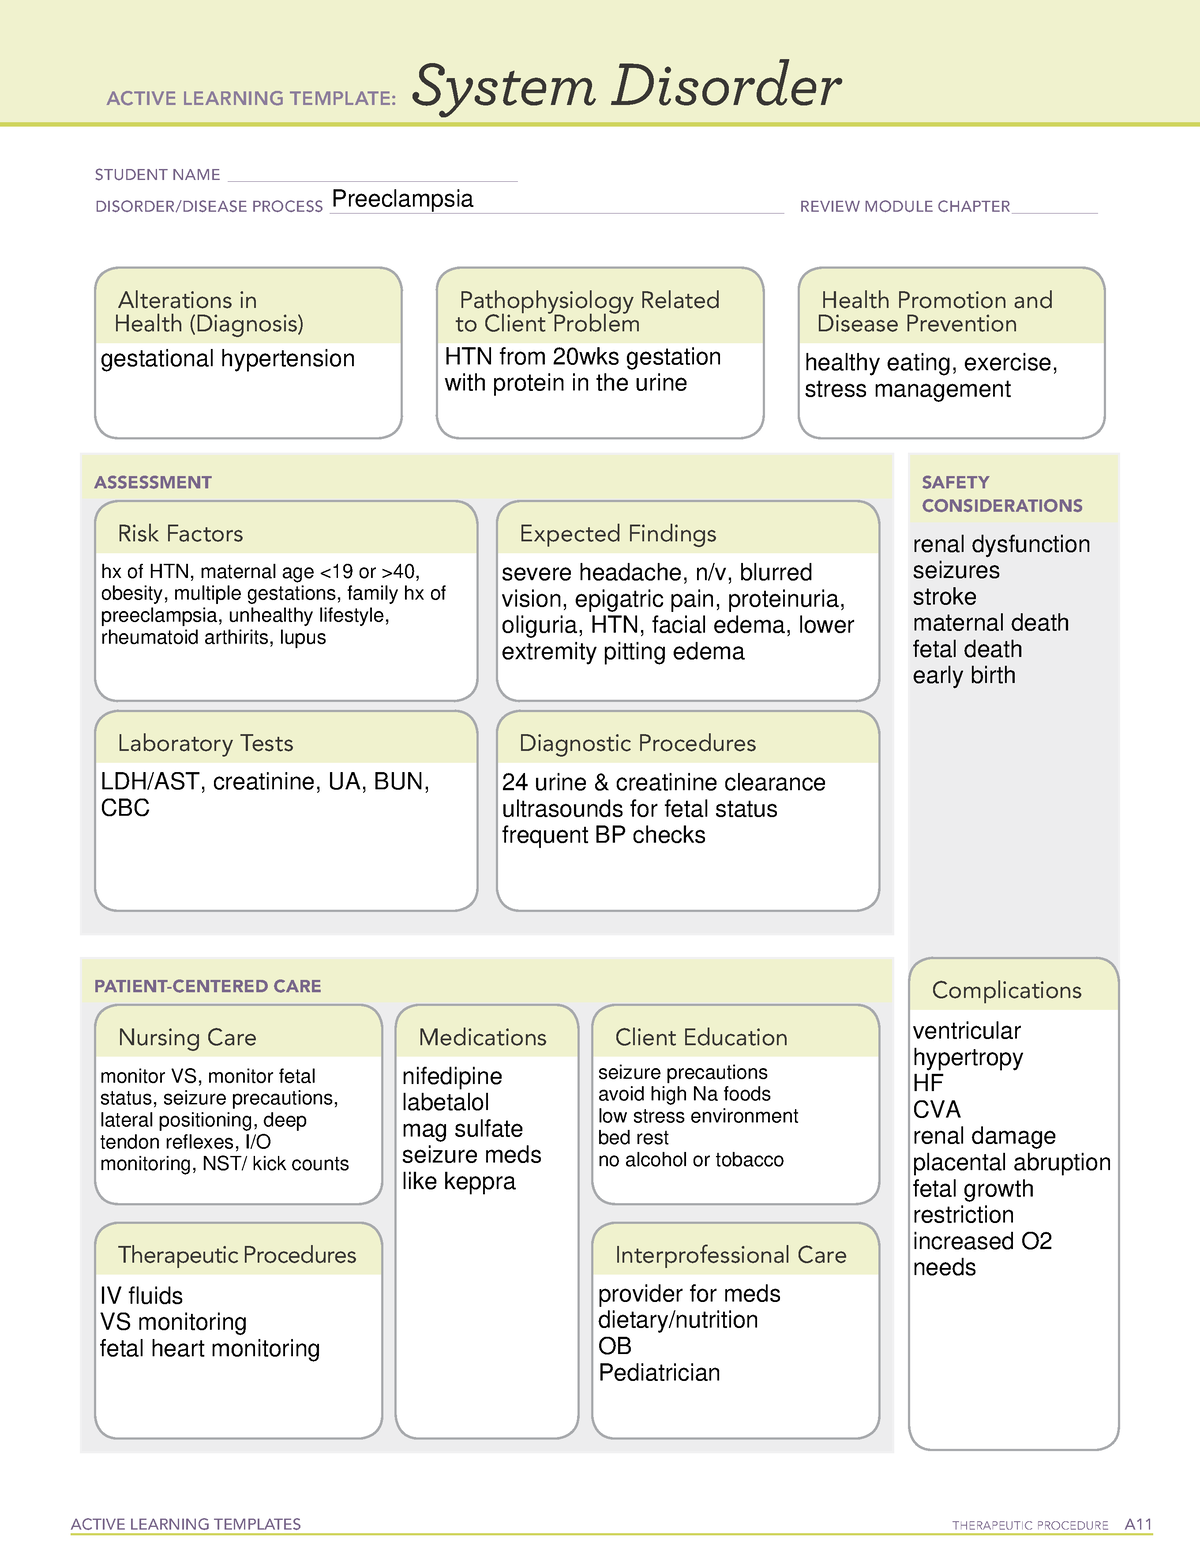 preeclampsia-ati-system-disorder-notes-active-learning-templates